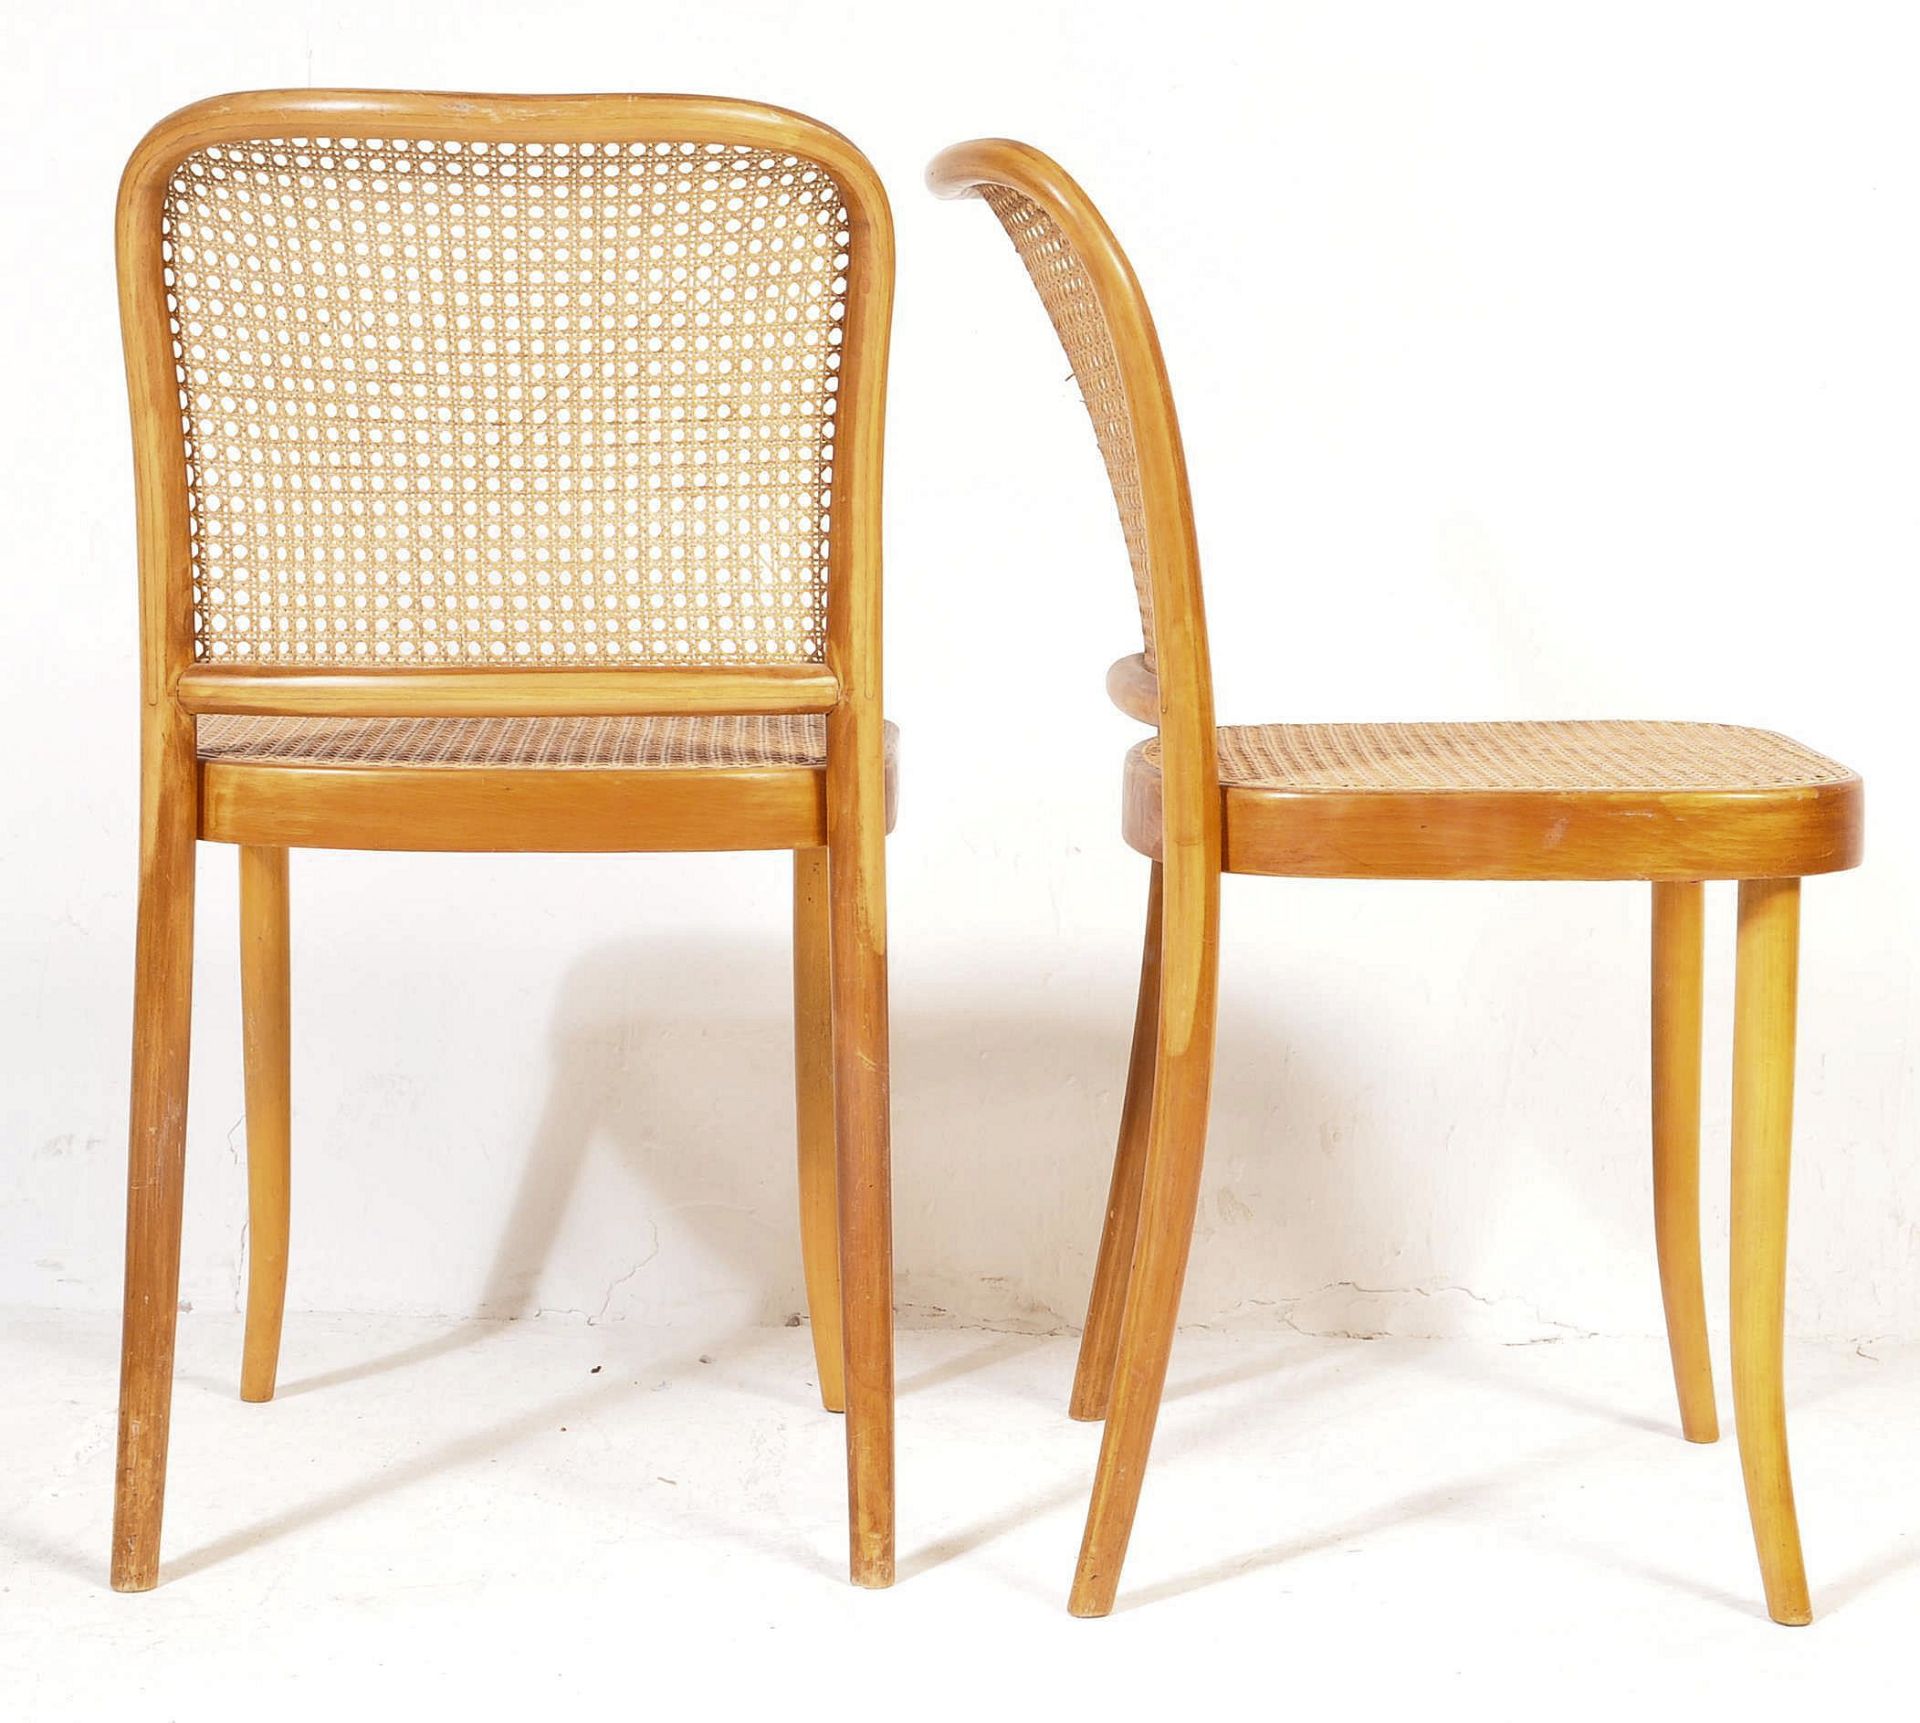 HARLEQUIN SET OF RETRO VINTAGE MID 20TH CENTURY BENTWOOD DINING CHAIRS - Image 4 of 11